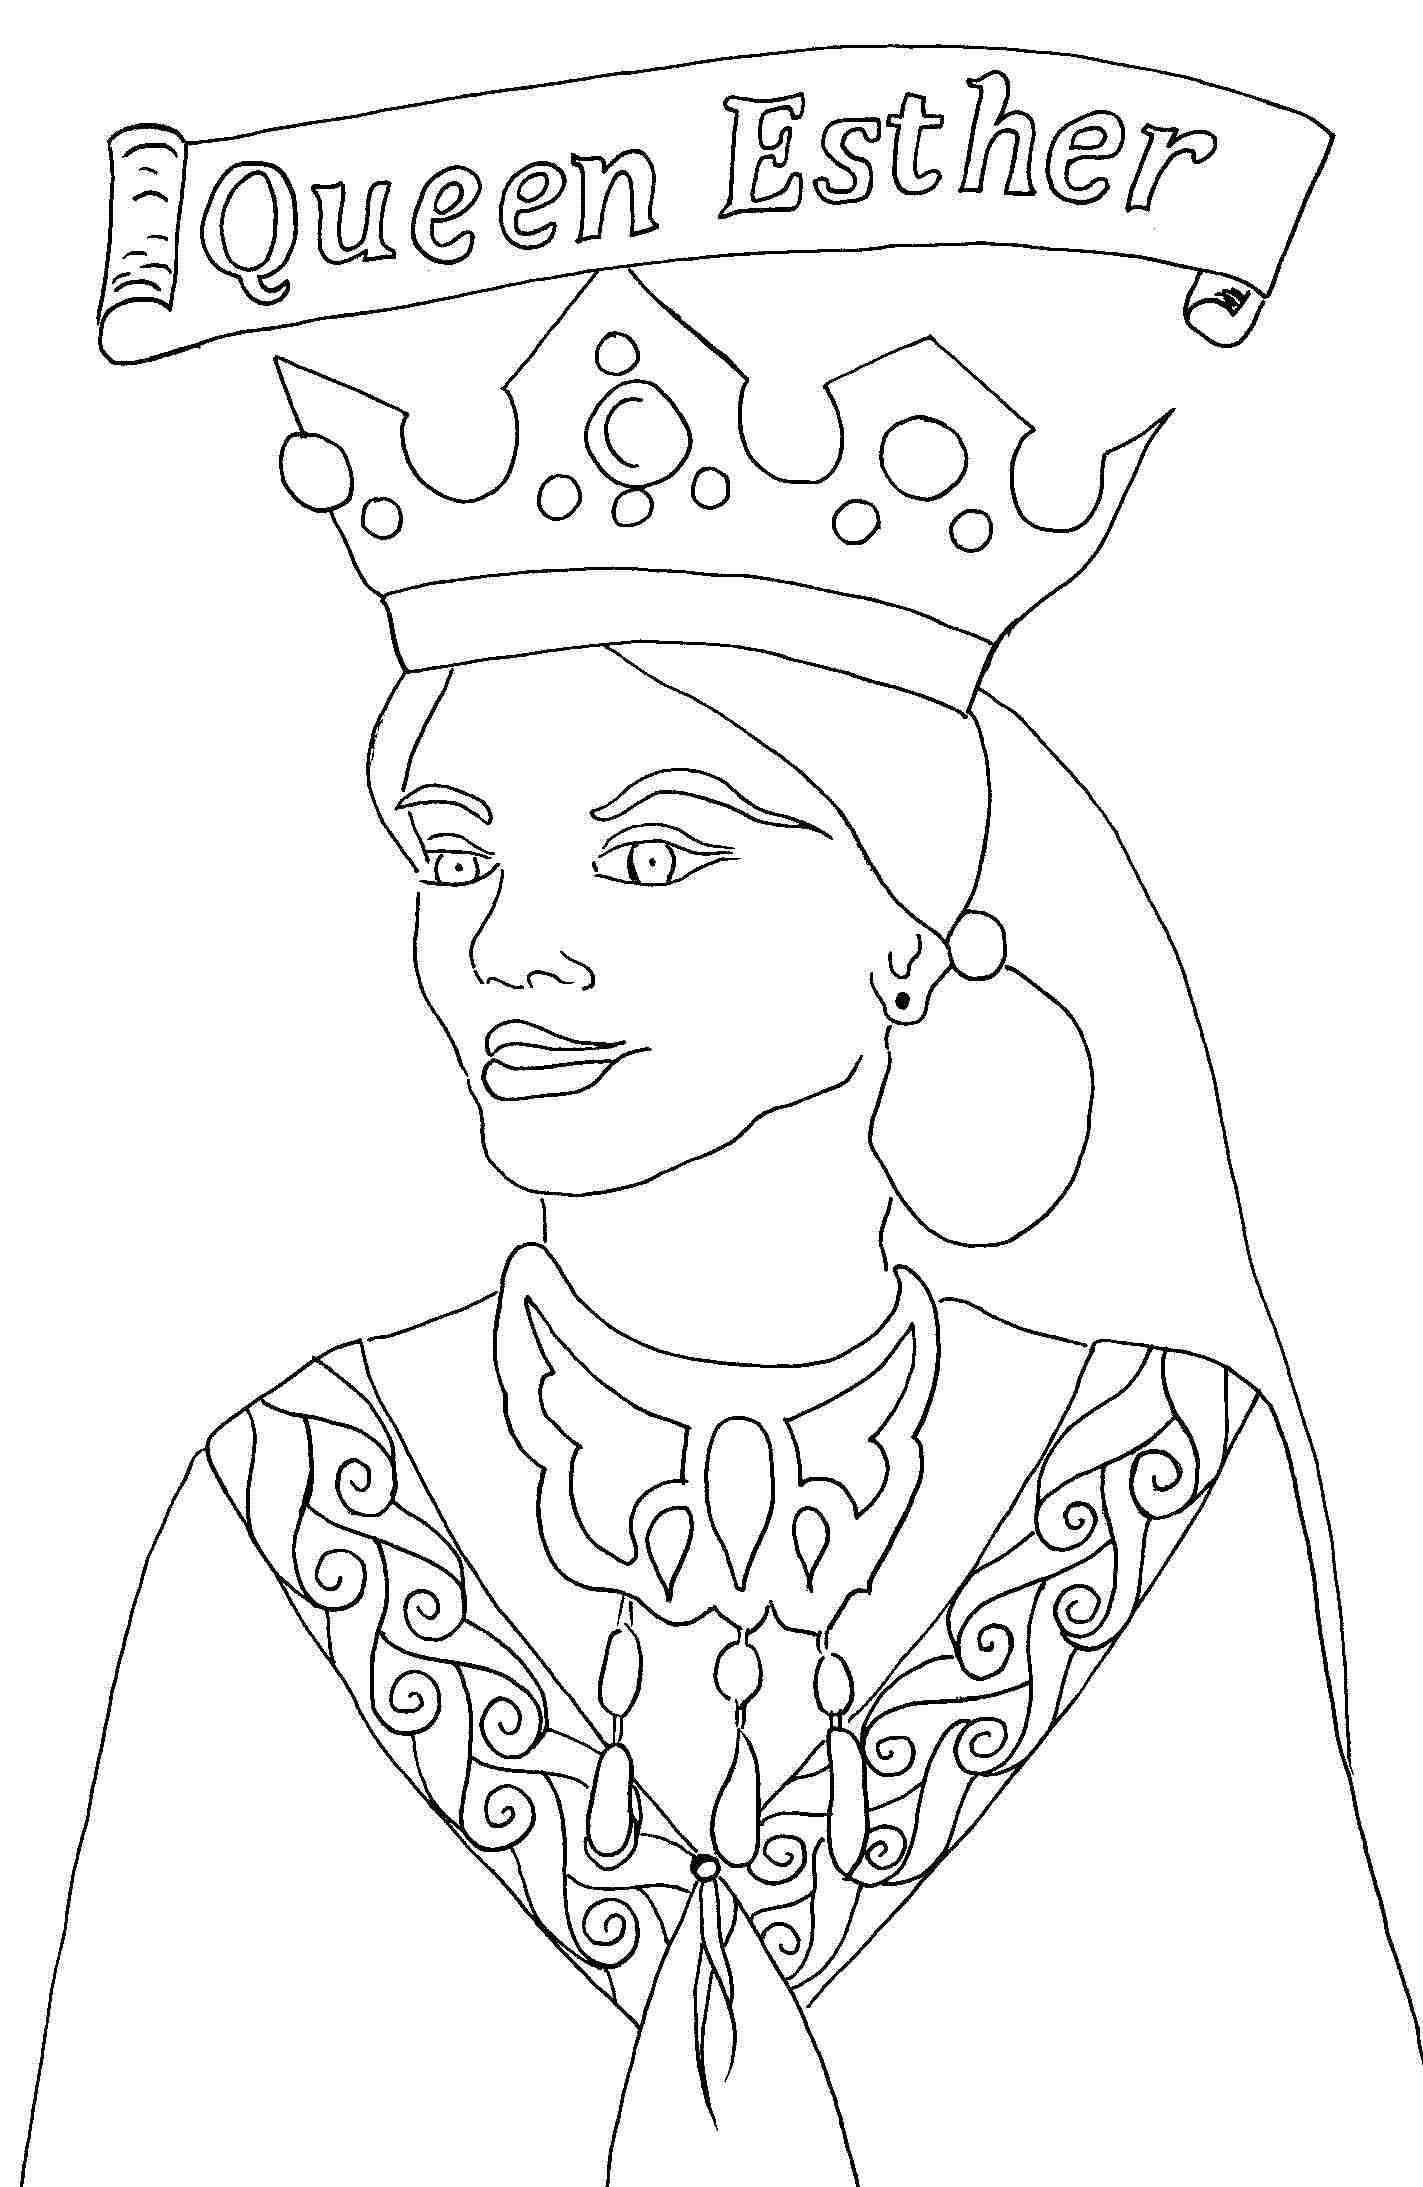 Queen Esther Coloring Pages Printable at GetDrawings.com ...